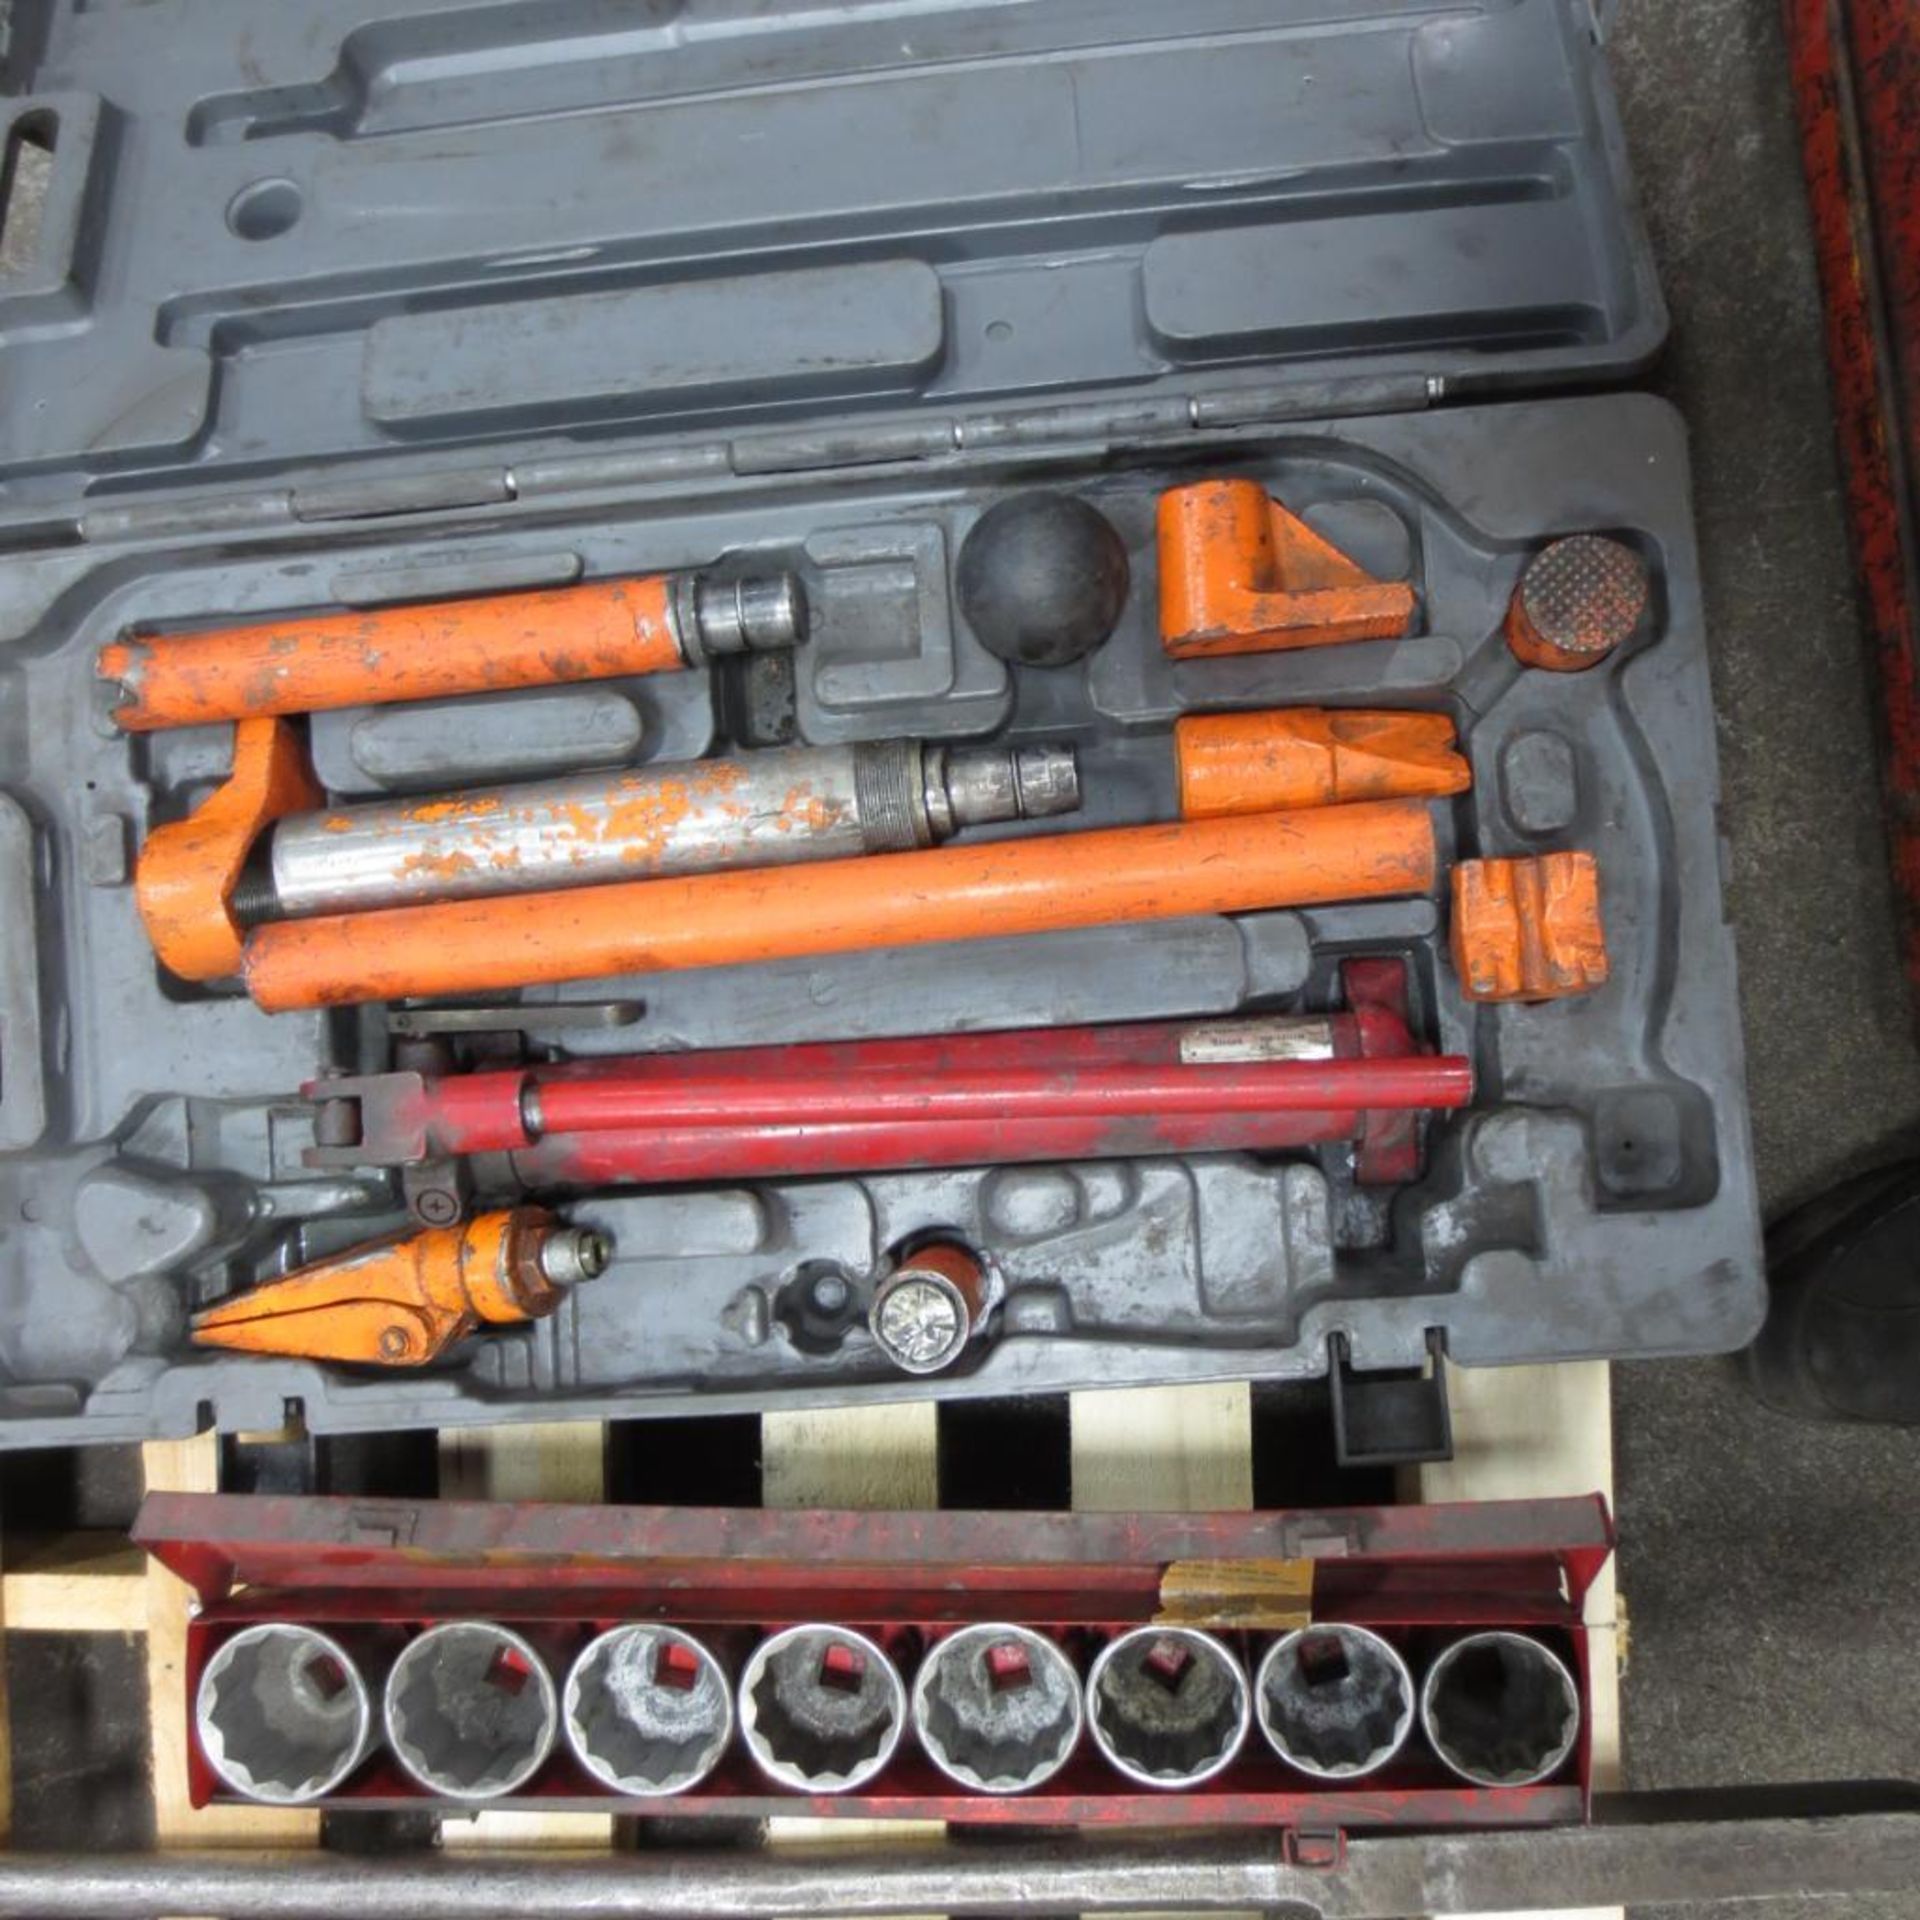 Skid with 10 Ton Portable Puller Kit, Tube Cutter, Socket and Socket Set ( Loc. Greenville, IL ) - Image 2 of 4